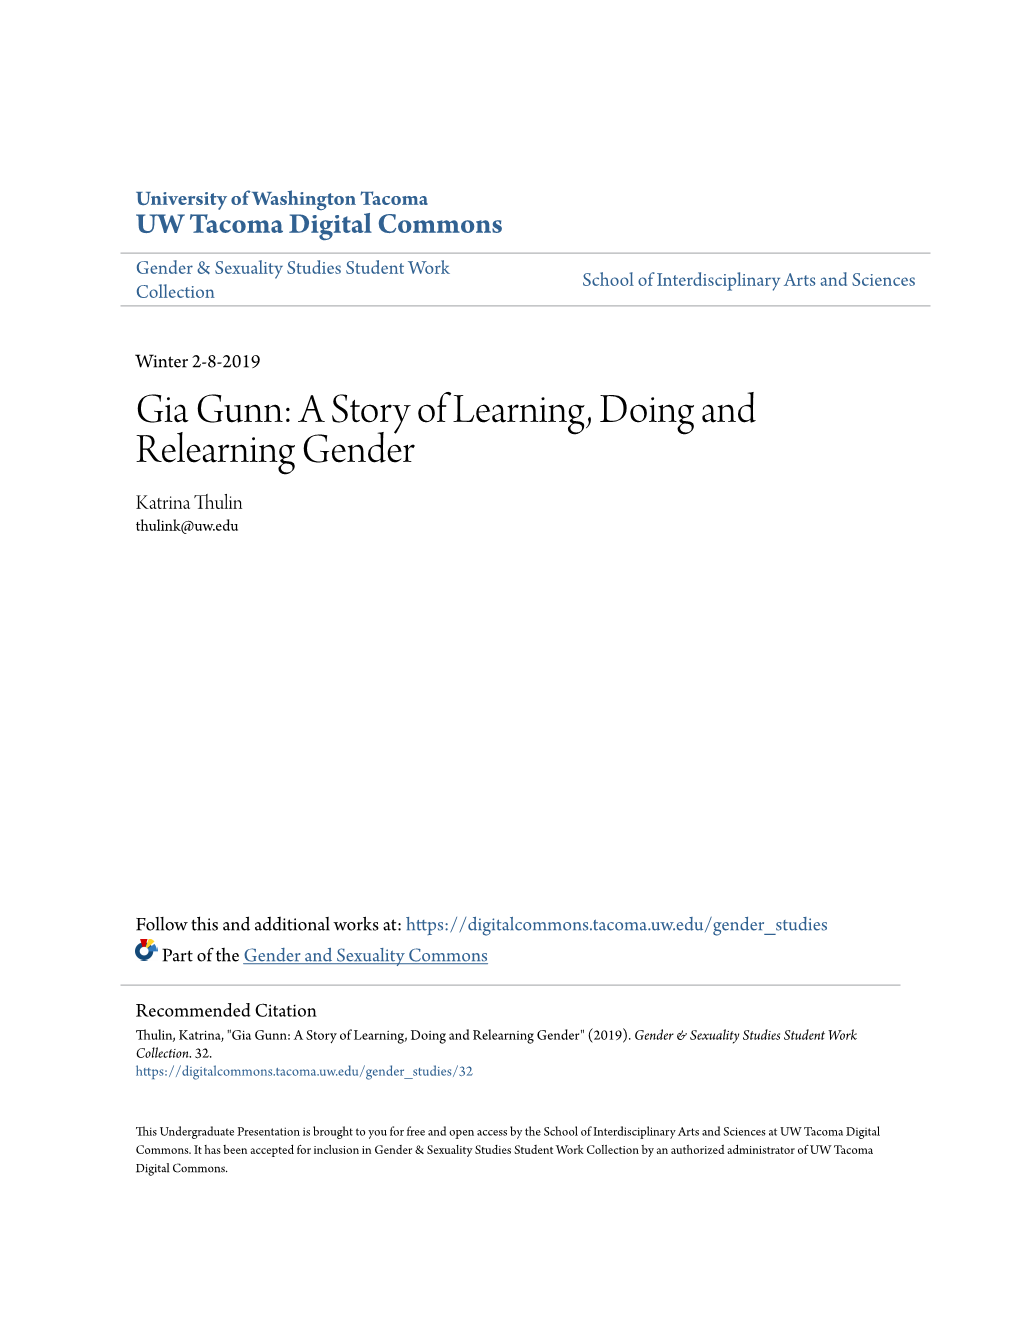 Gia Gunn: a Story of Learning, Doing and Relearning Gender Katrina Thulin Thulink@Uw.Edu